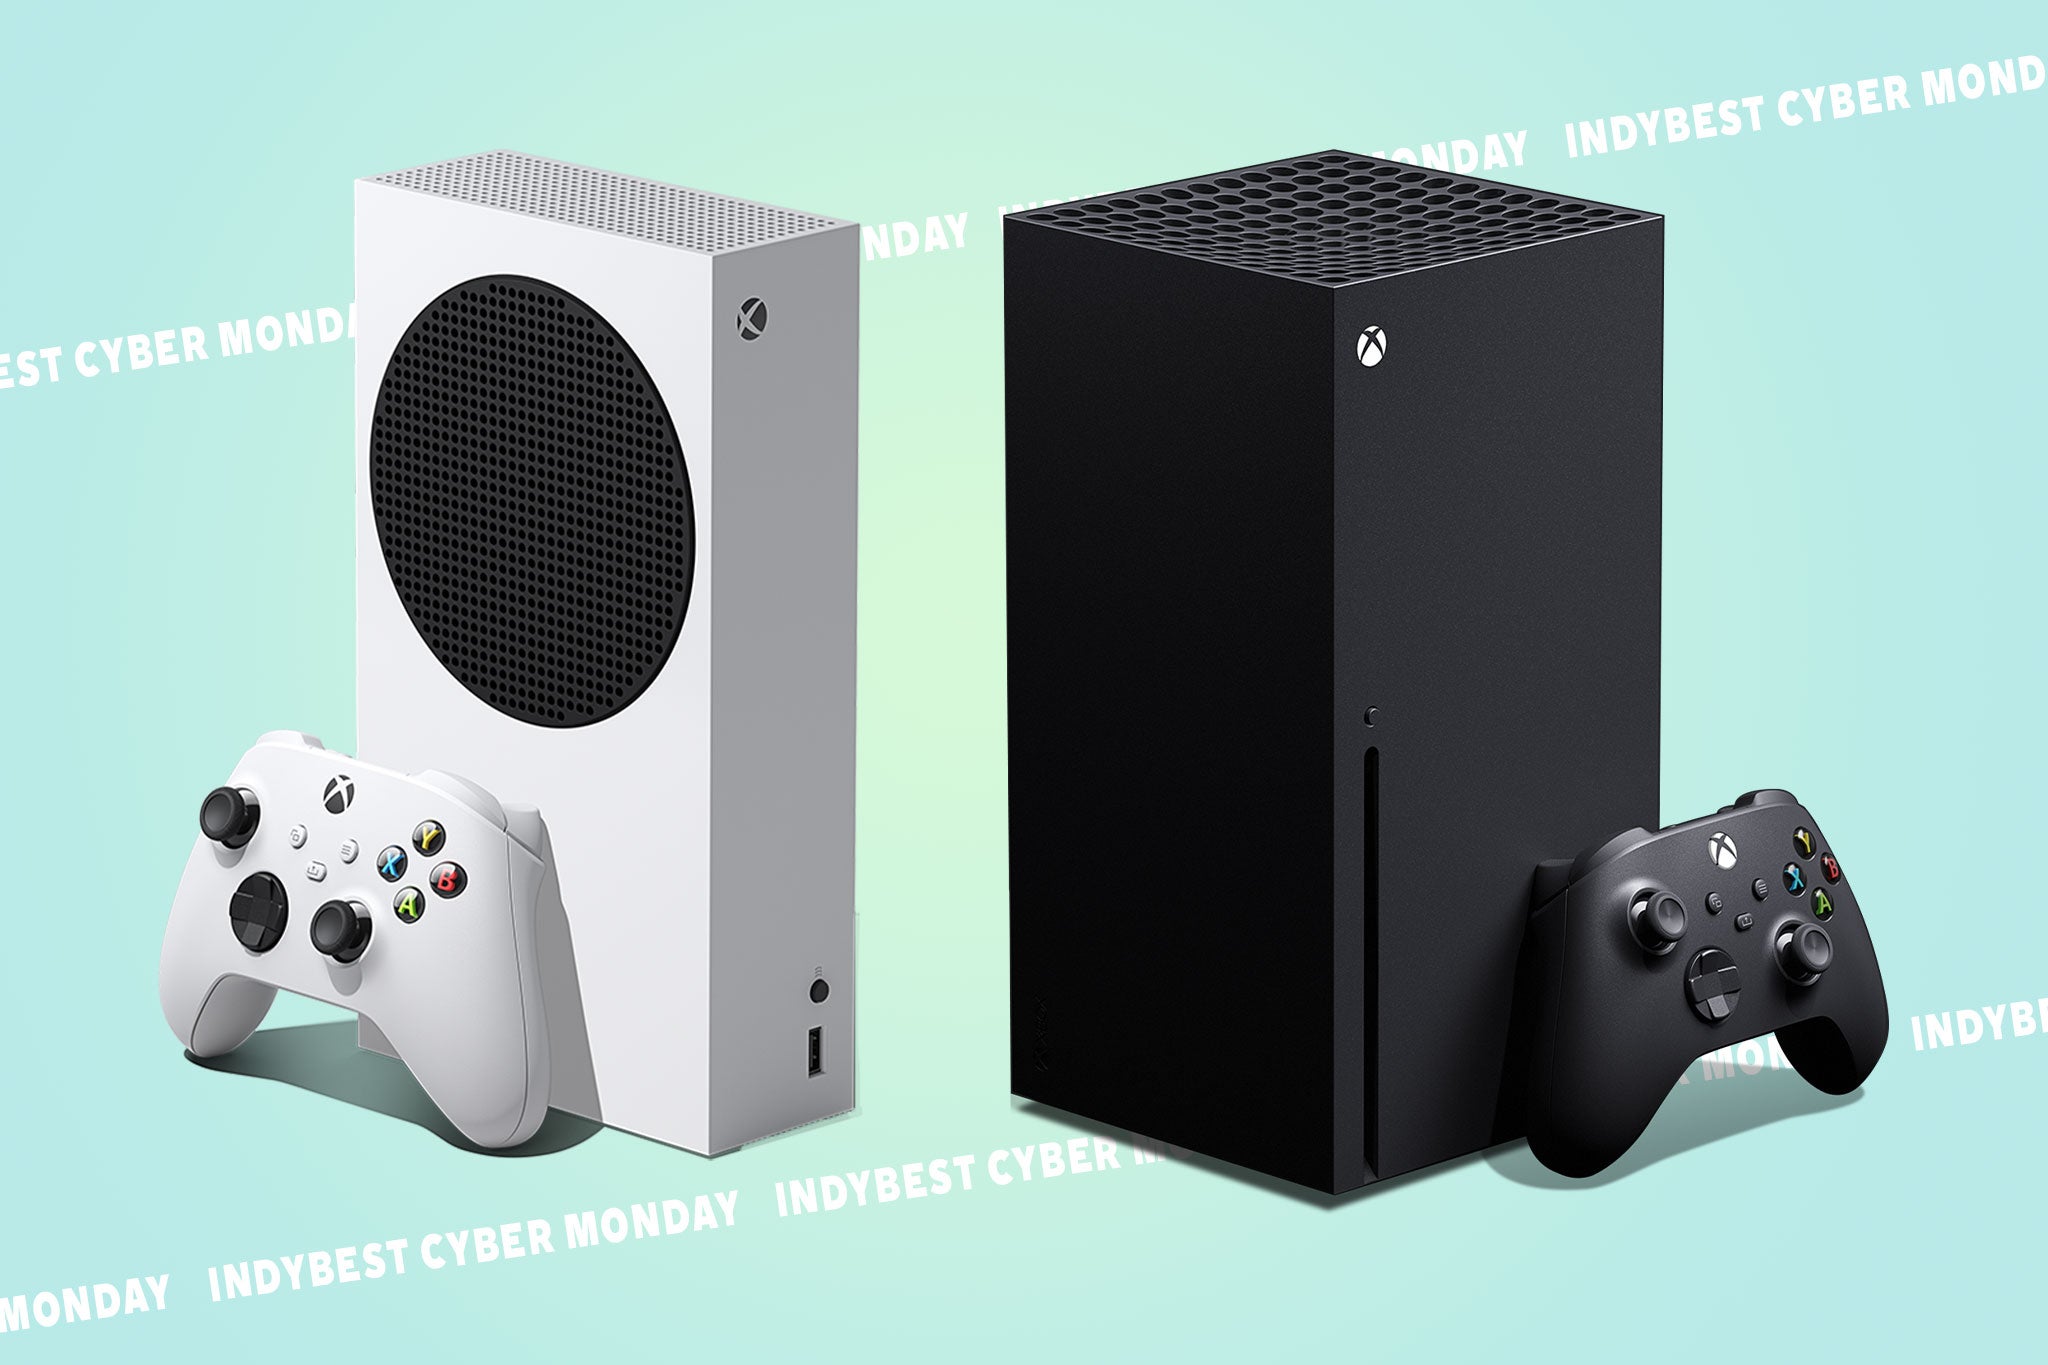 The Xbox Series S (left) is a cheaper and less powerful version of the Xbox Series X, and doesn’t take physical discs